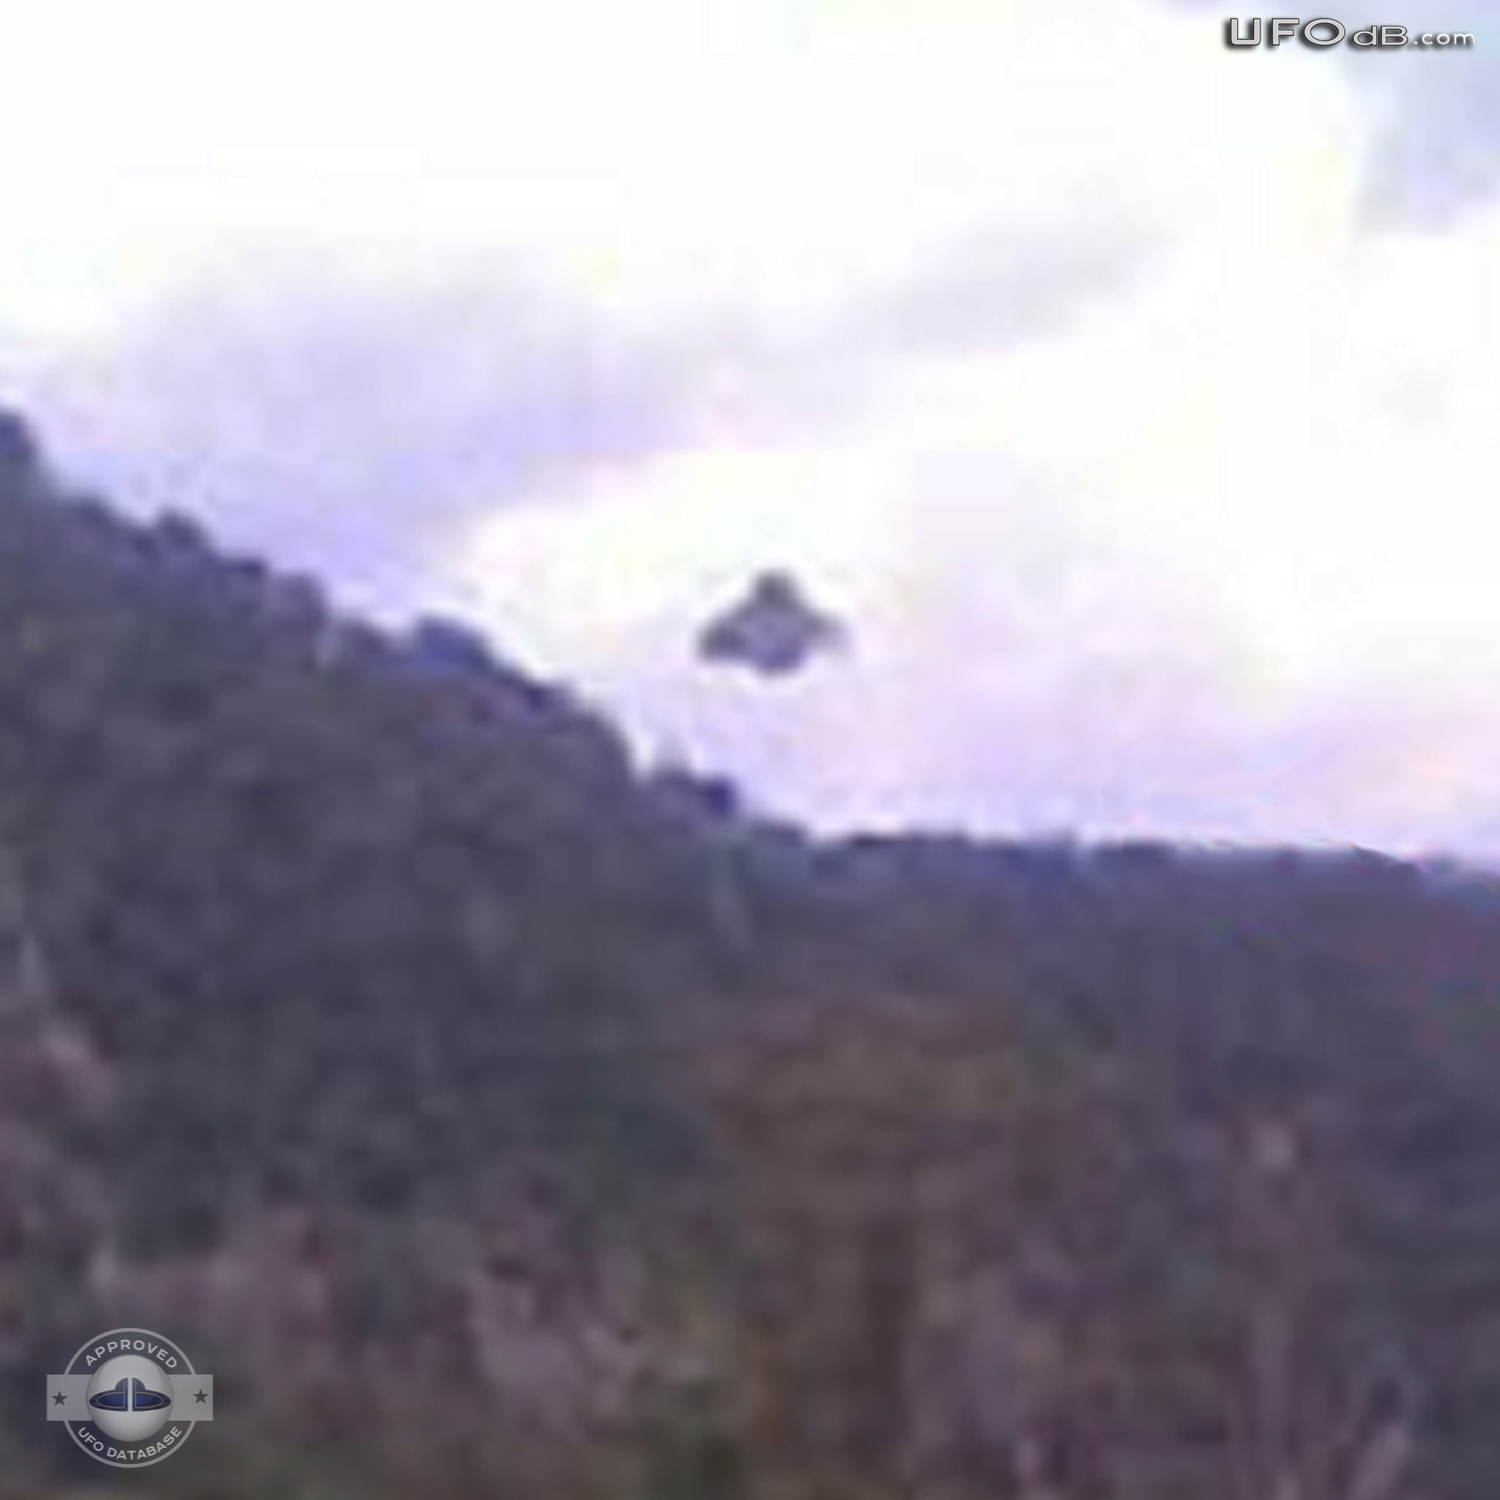 Australian Gold prospector capture UFO on picture in New South Wales UFO Picture #354-3